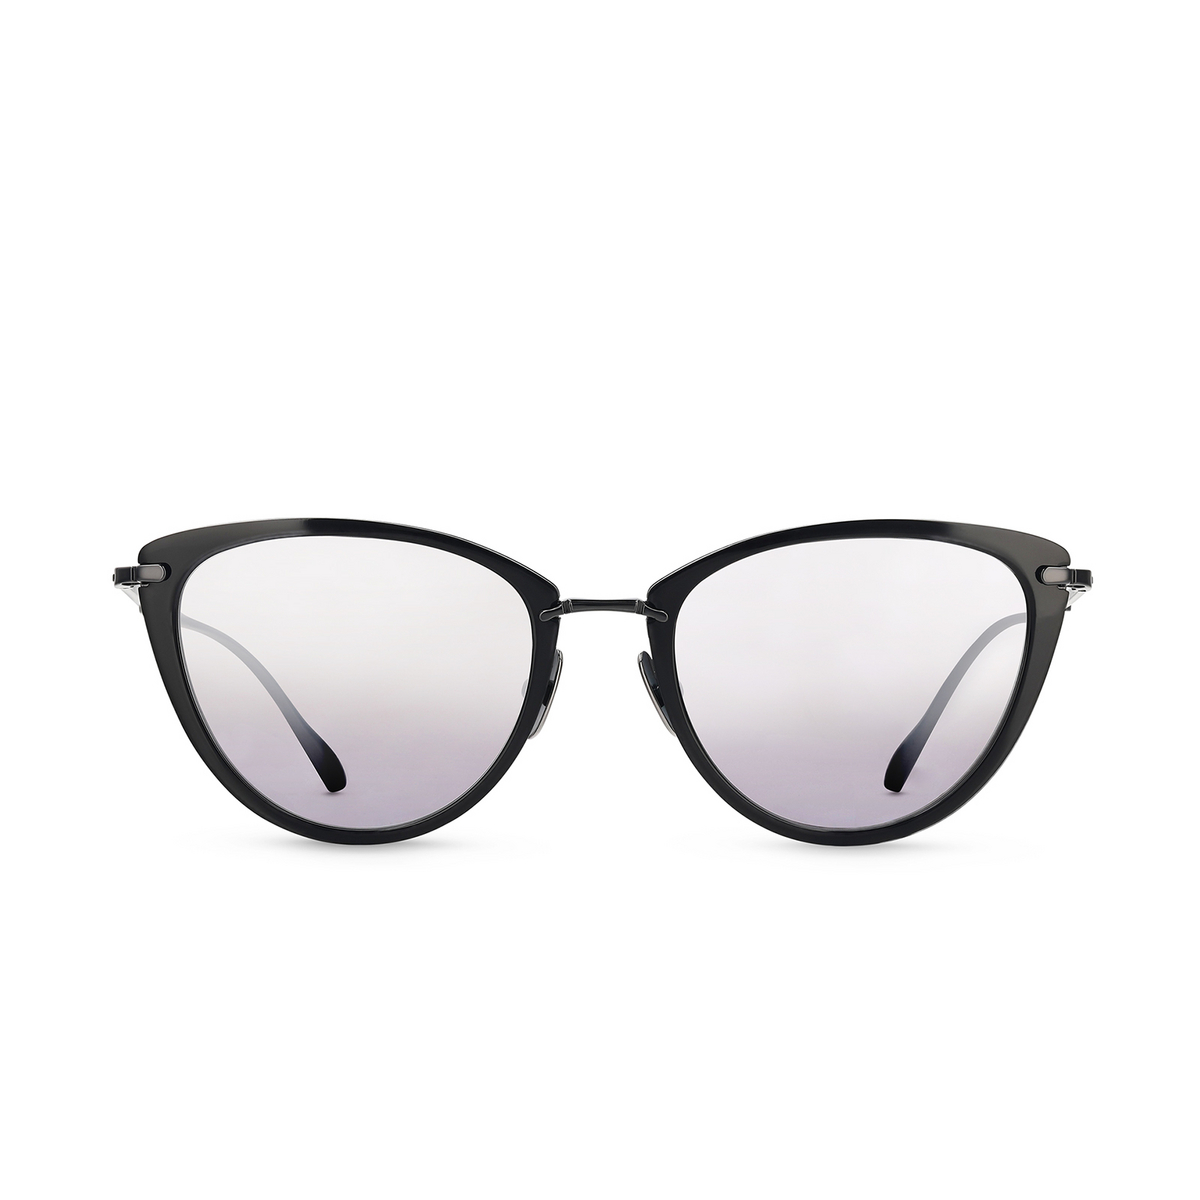 Mr. Leight® Butterfly Sunglasses: Beverly S color Bk-sbk/sf - front view.